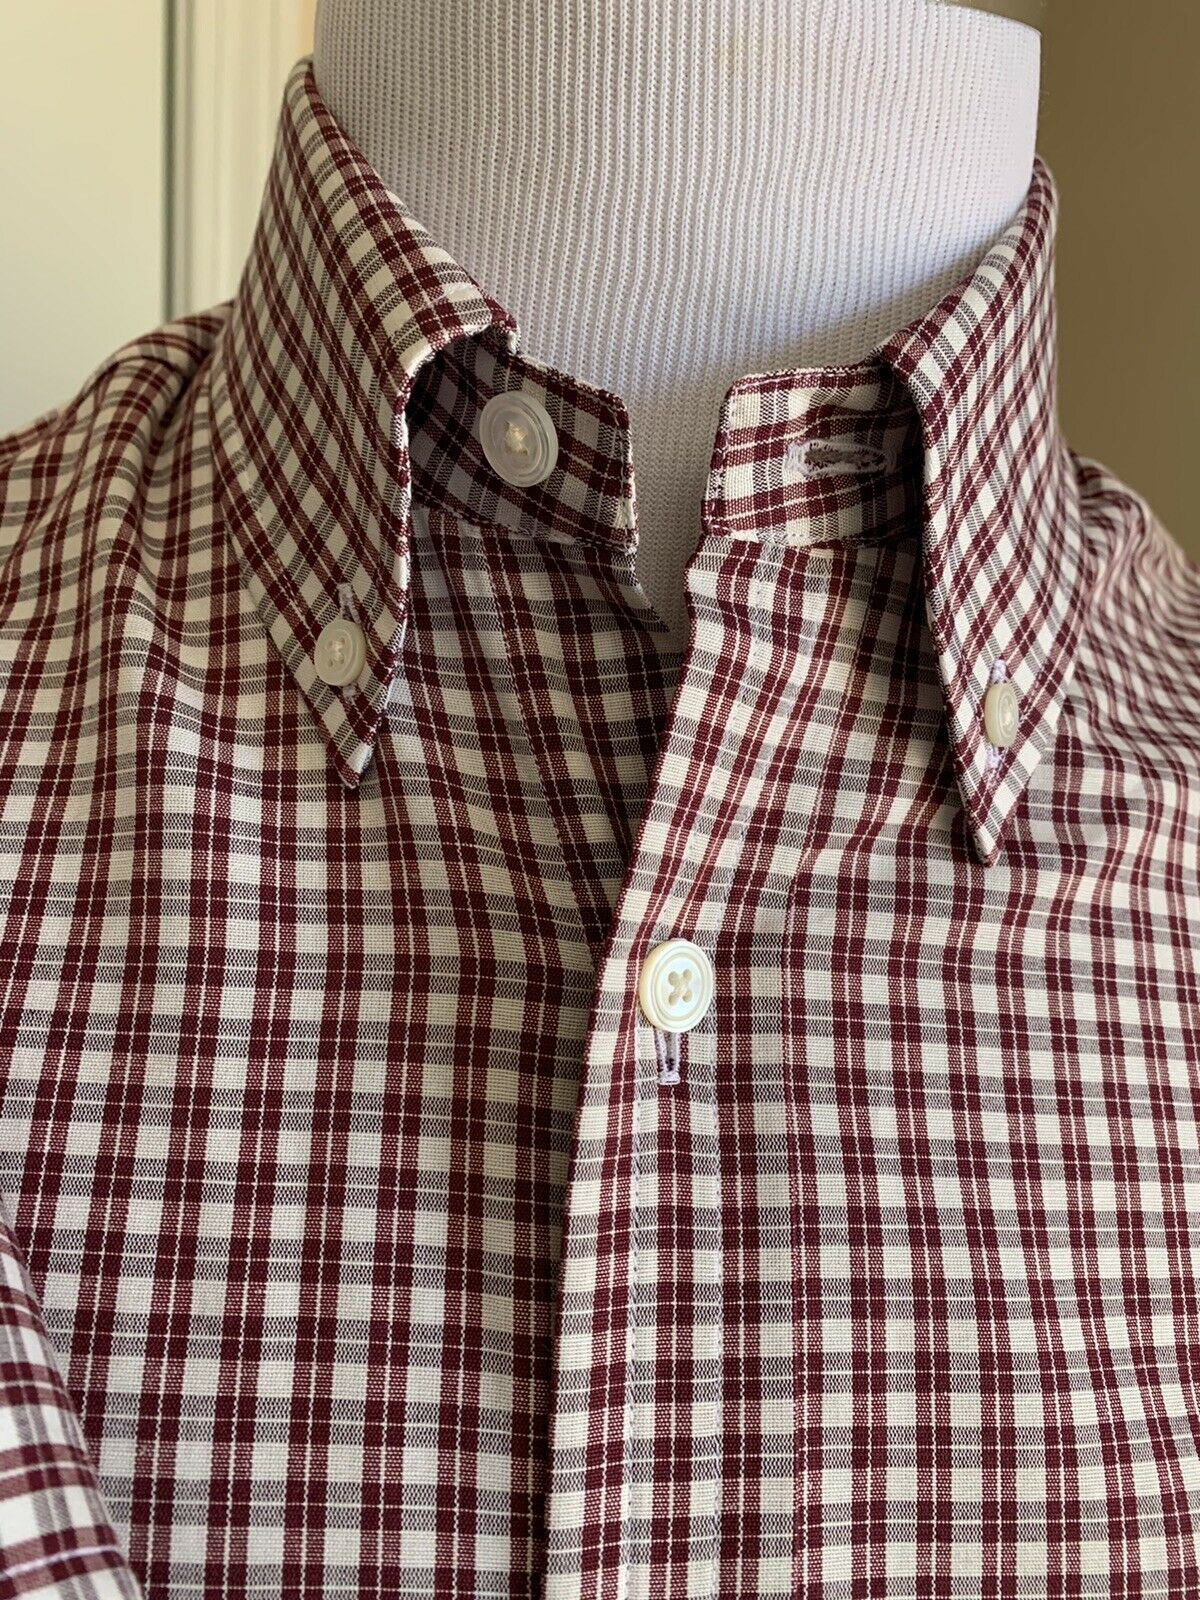 NWT $240 Dunhill Mens Dress Shirt DK Red/White Size S